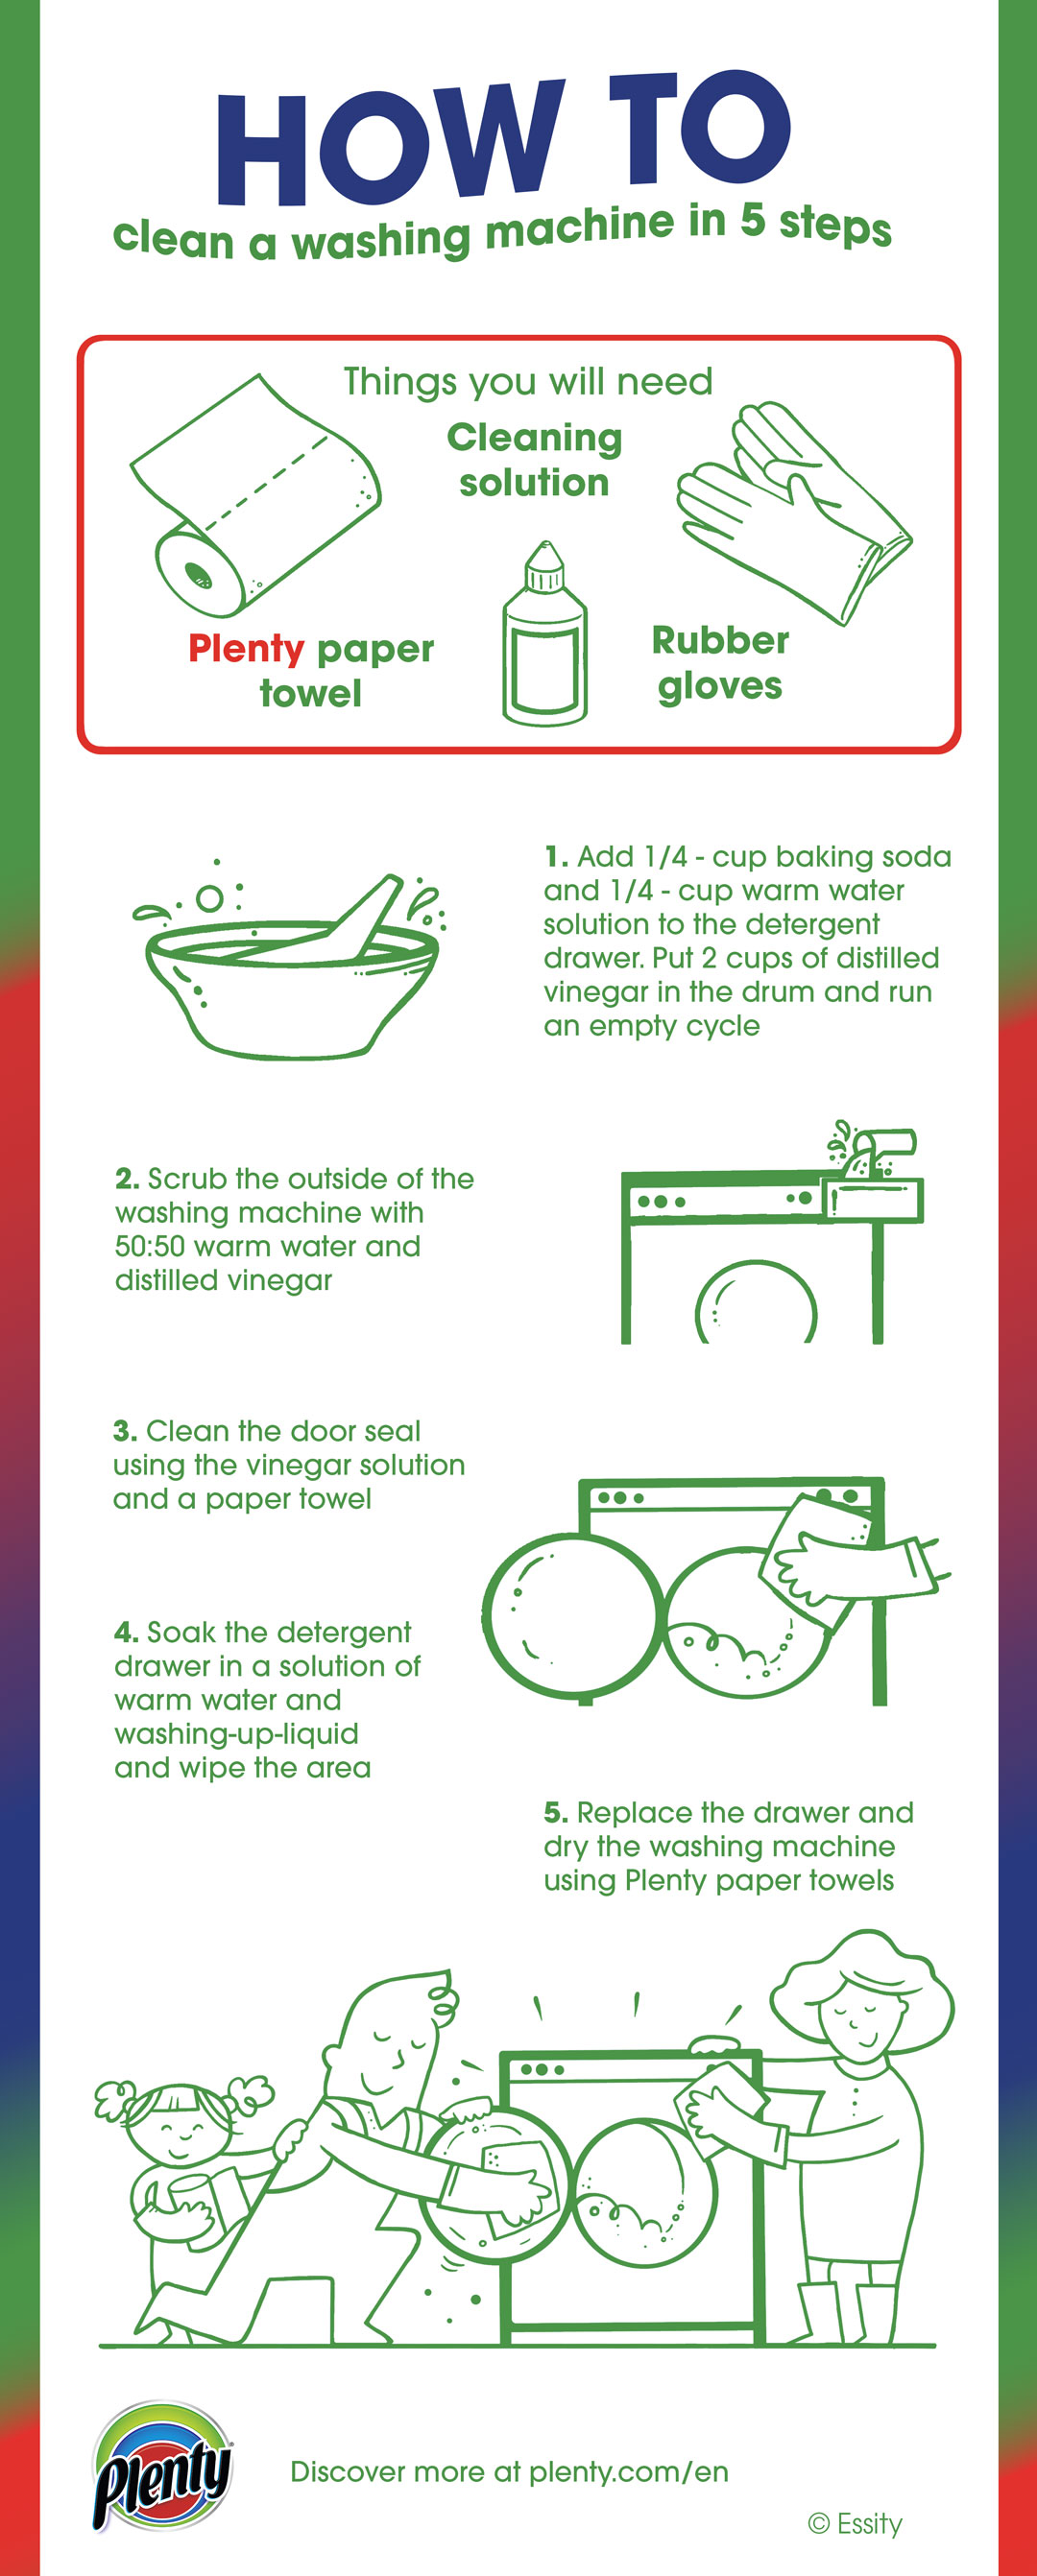 A Basic Guide to How to Use a Washing Machine